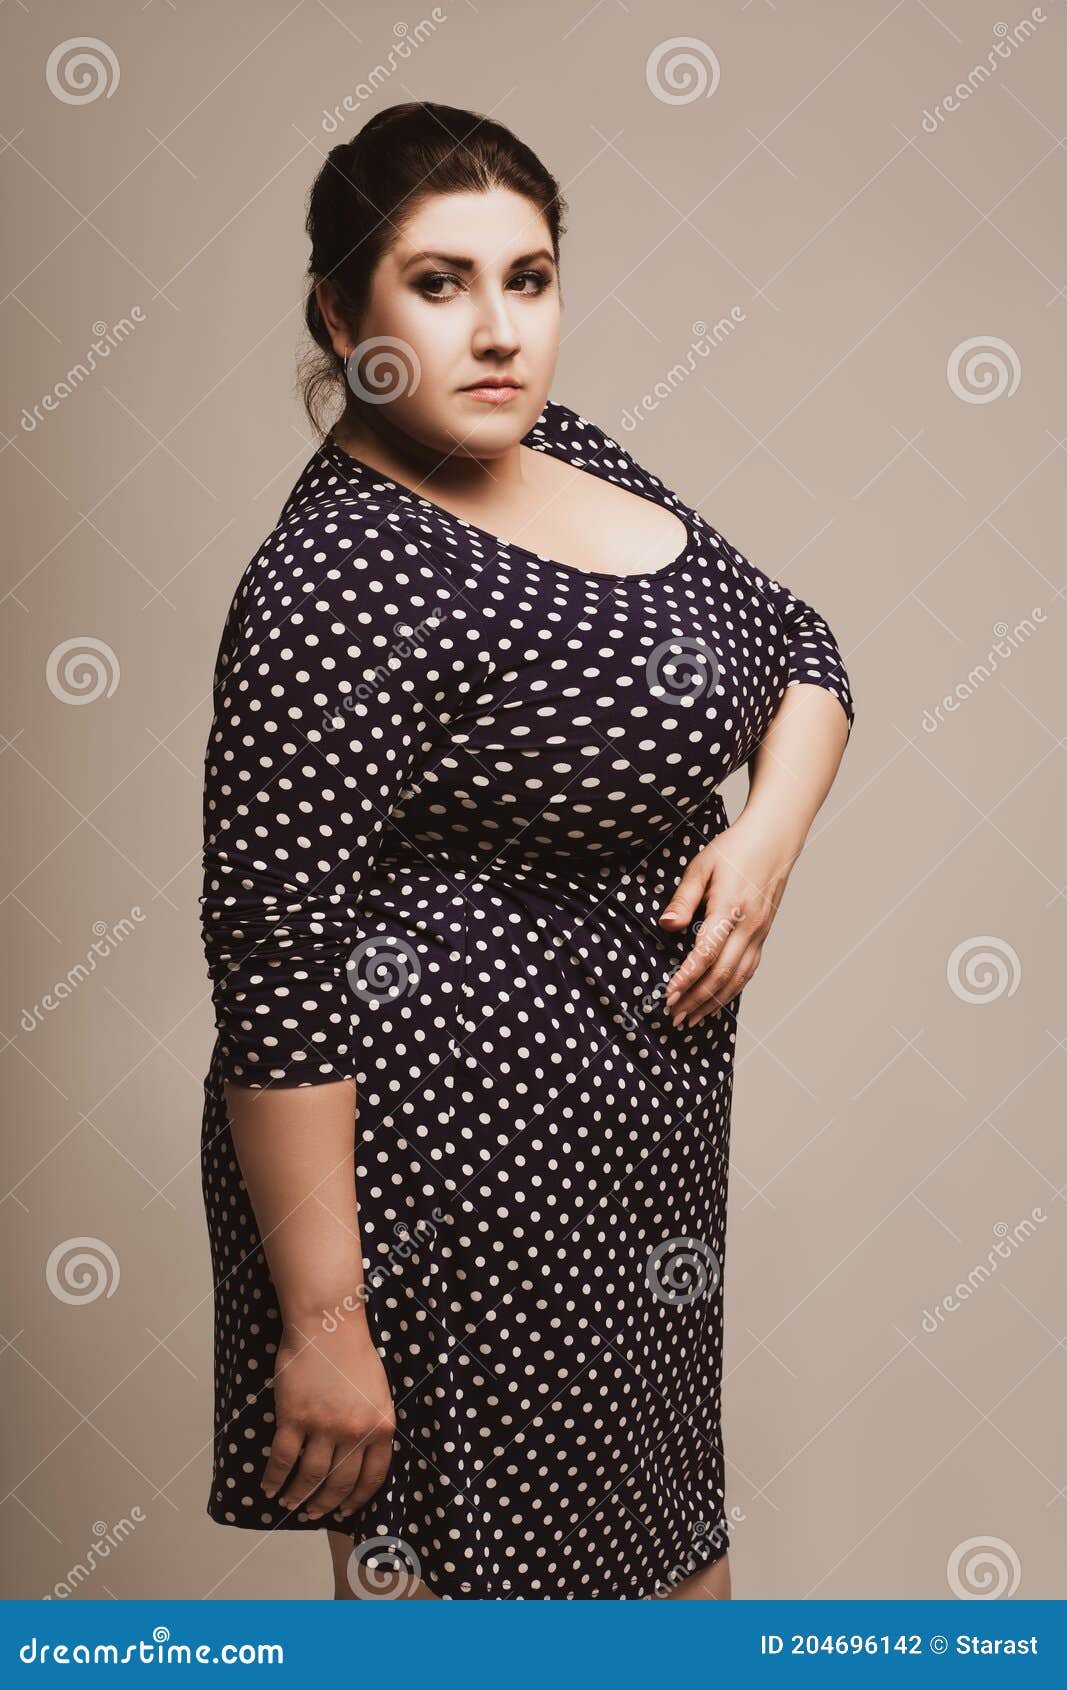 Plus Size Fashion Model in Polka Dot Dress, Fat Woman on Studio Background  Stock Photo - Image of breast, casual: 204696142